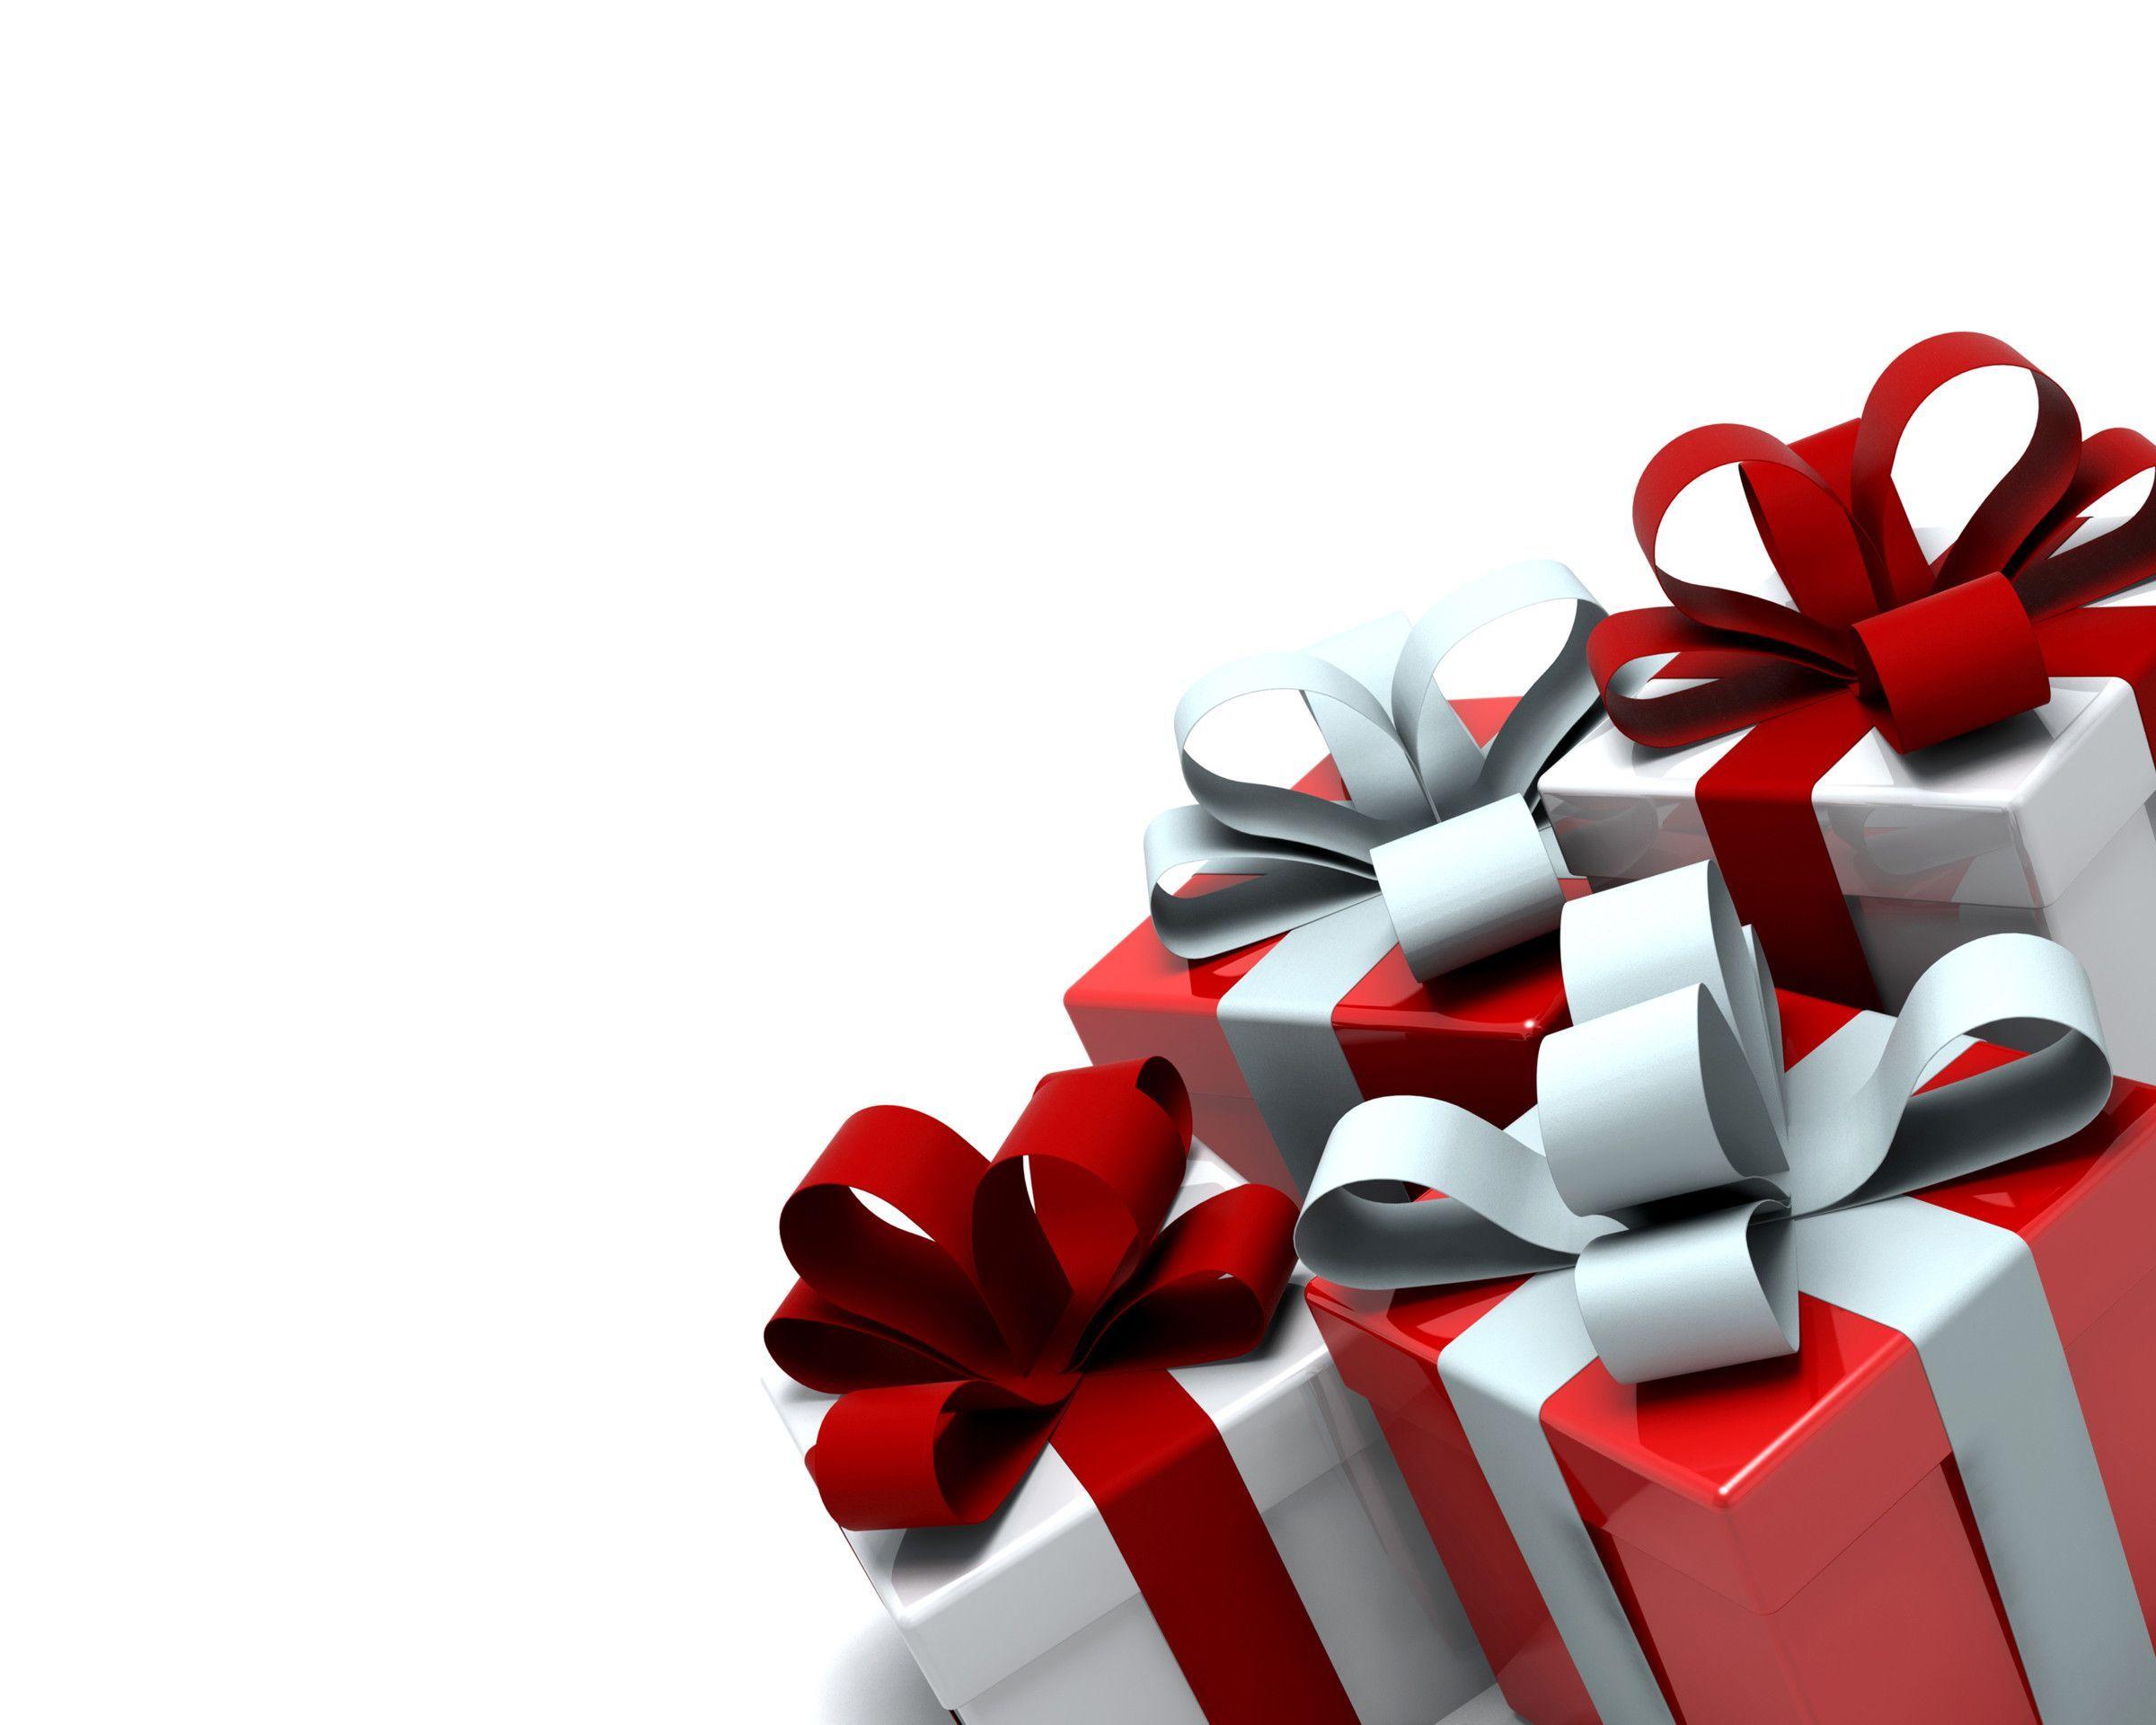 Christmas Gifts Full HD Background. High Definition Wallpaper